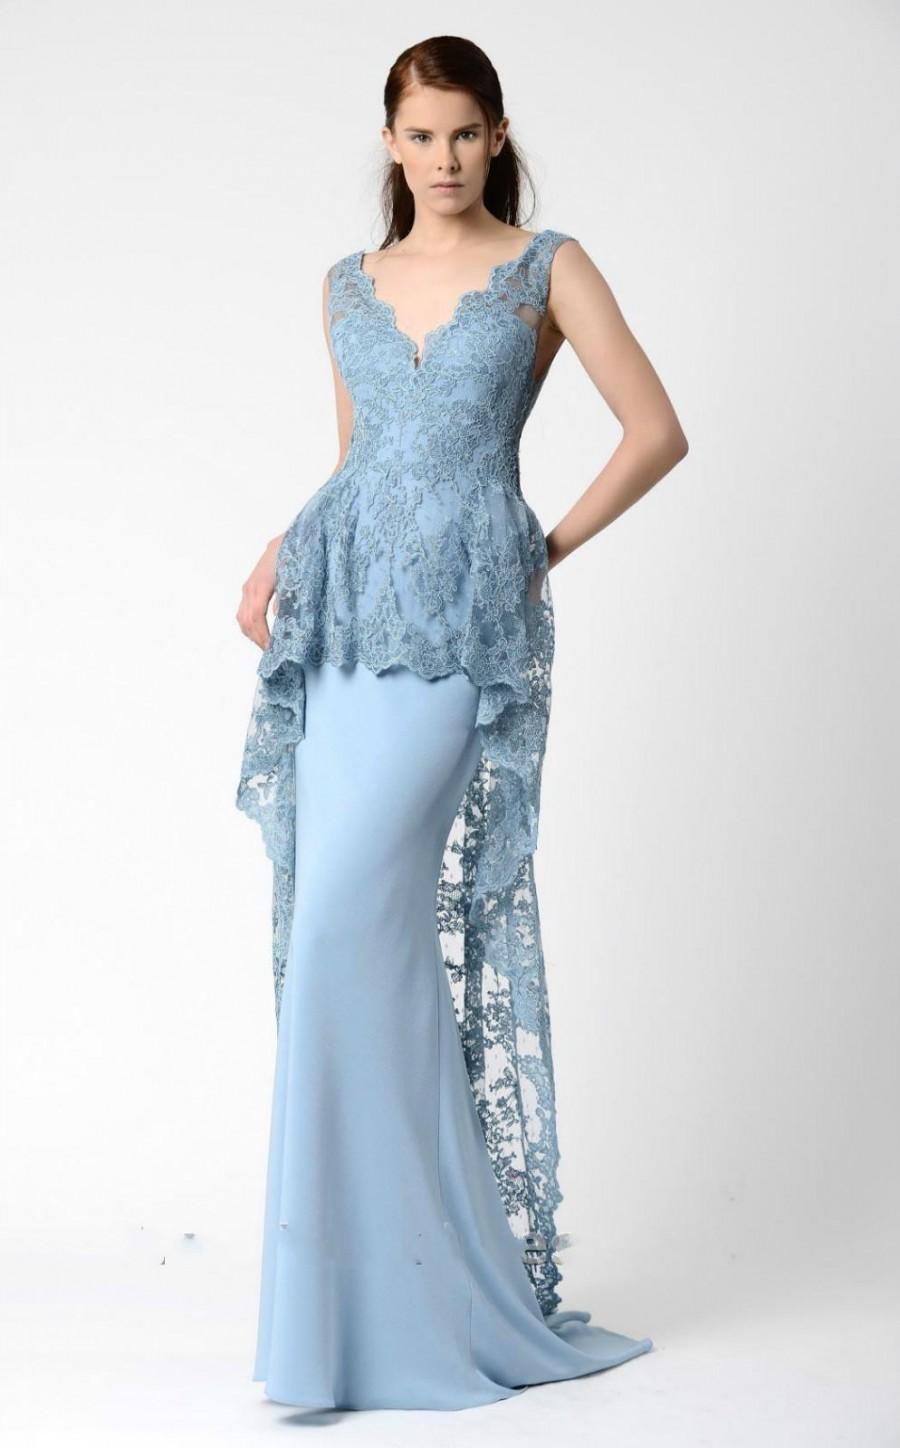 Mariage - 2016 Mermaid Evening Dresses Gowns Formal Prom With V Neck Sheer Neckline Sexy Bare Back Appliqued Blue Lace Party Formal Full Length Online with $126.39/Piece on Hjklp88's Store 